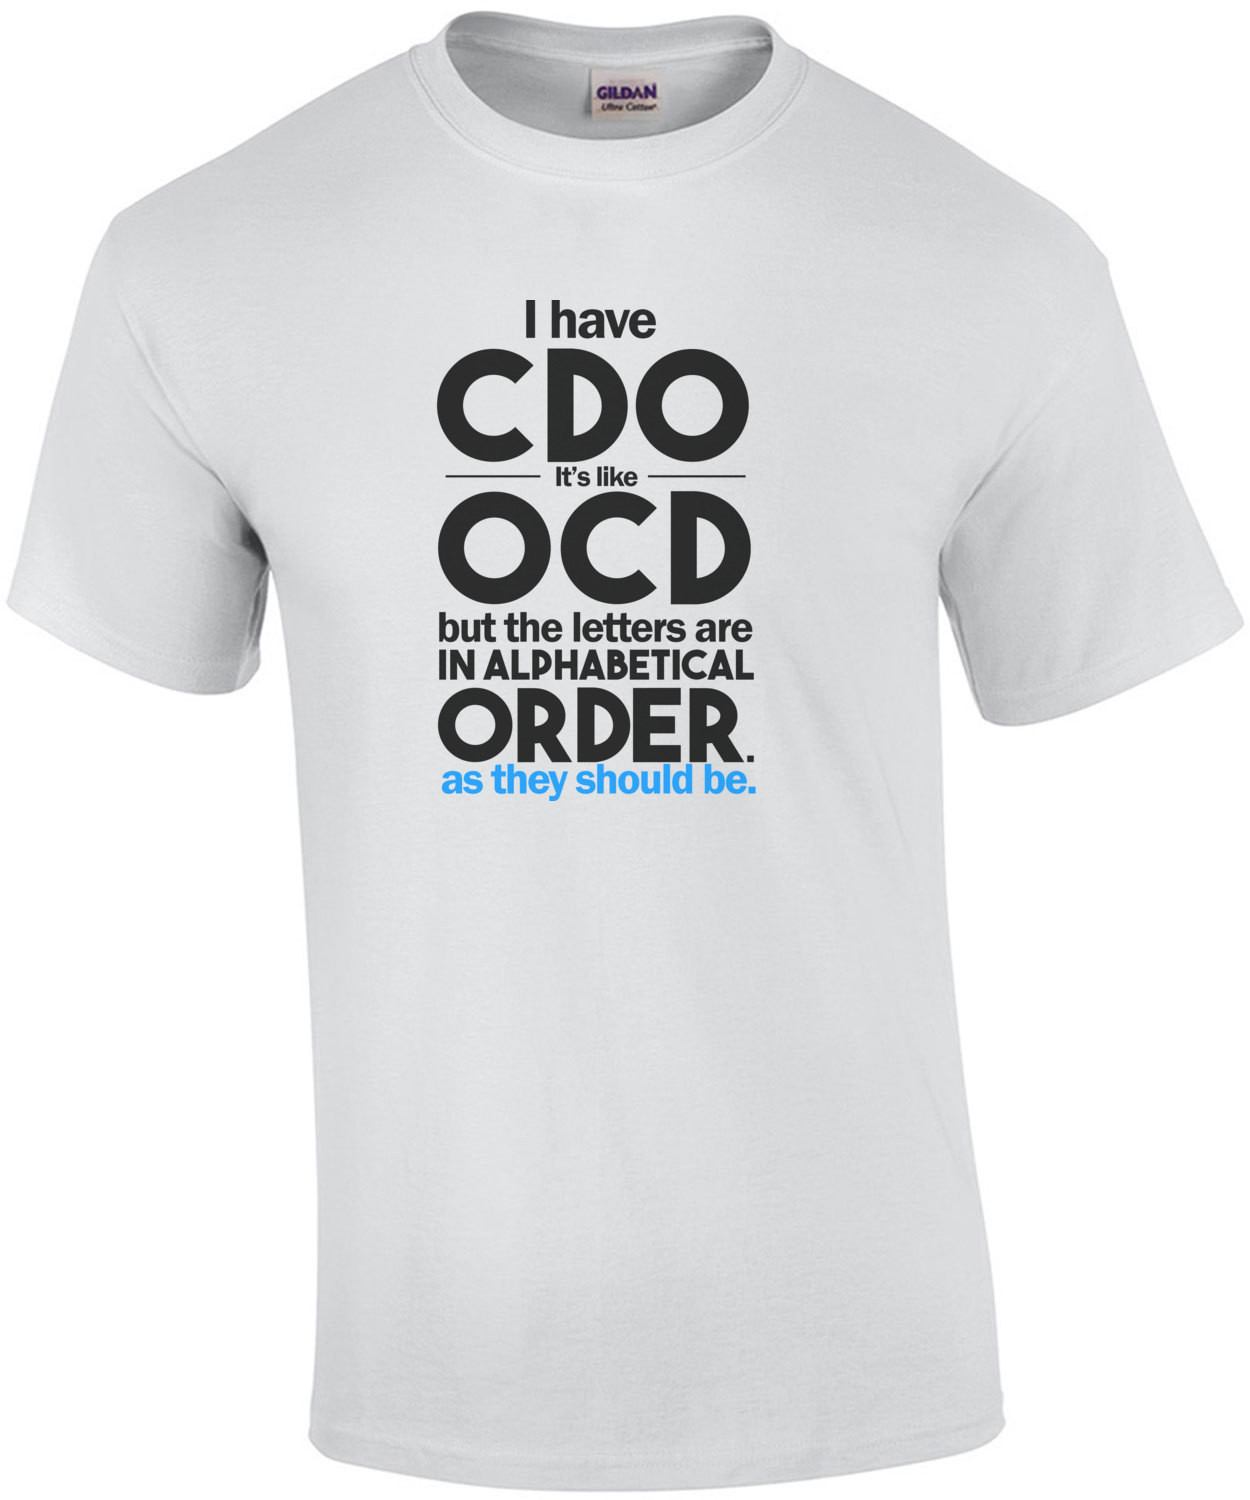 I have CDO. It's a lot like OCD but all the letters are in alphabetical order as they should be! Shirt